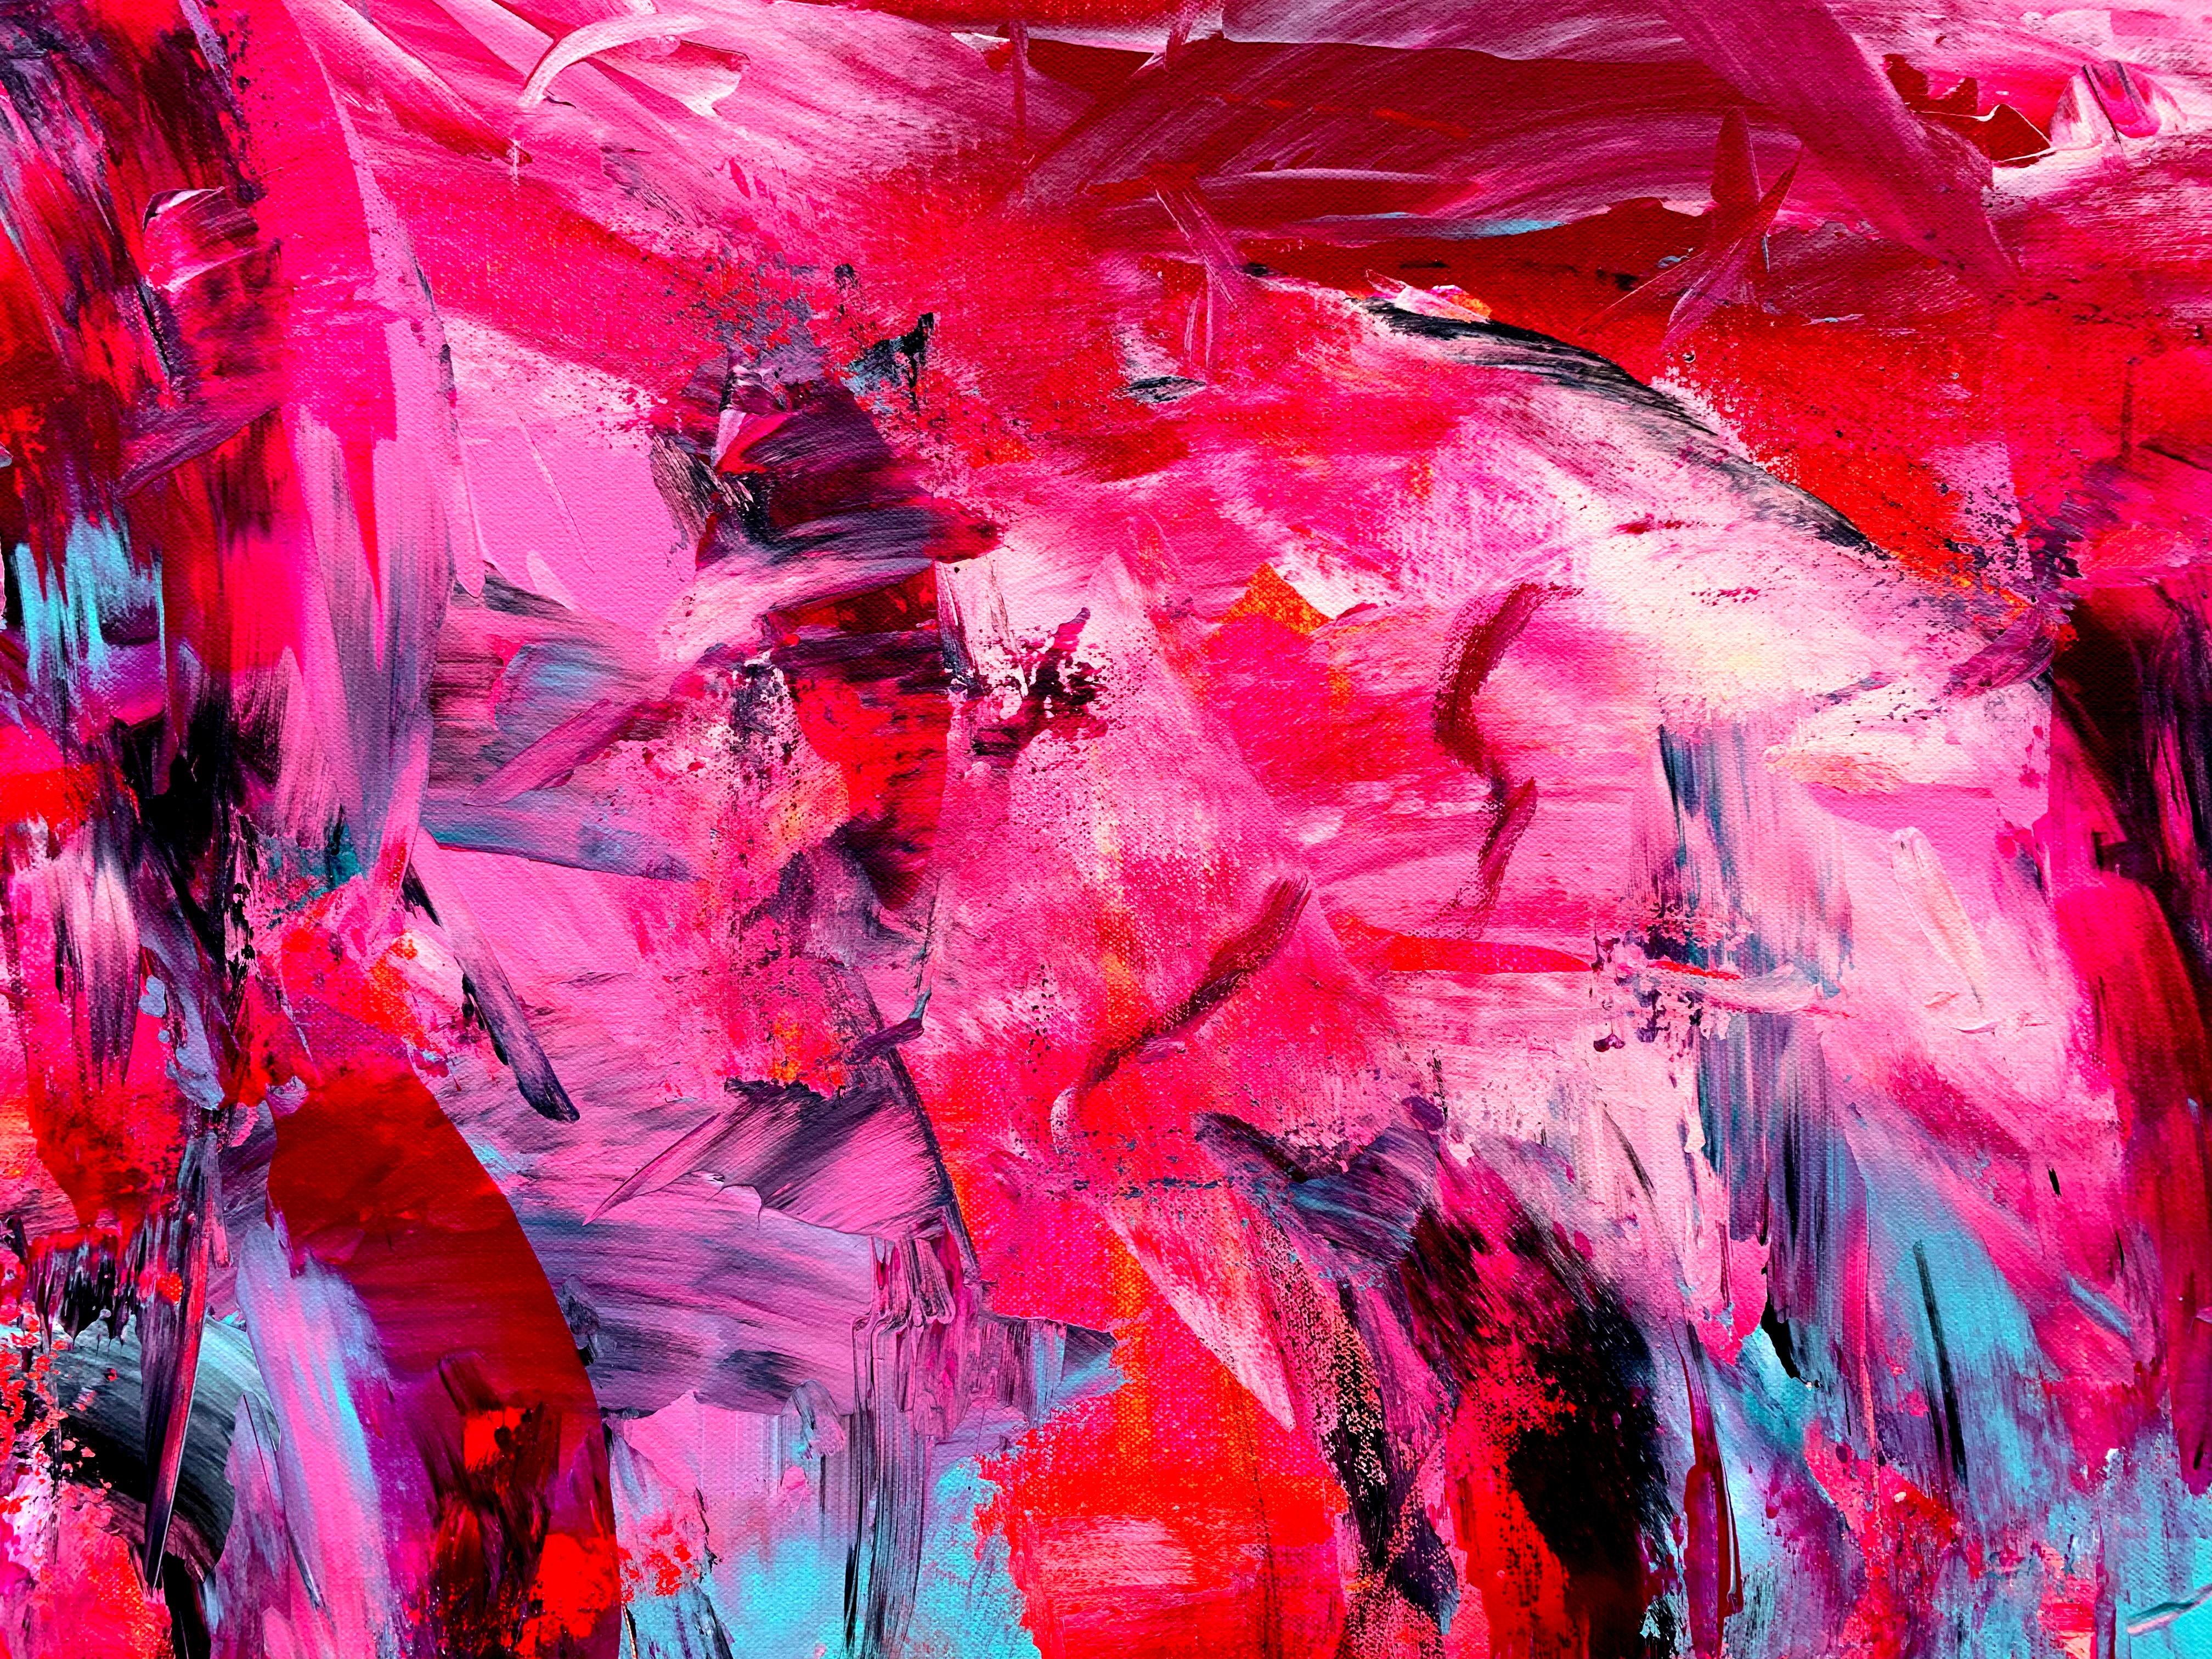 Otherworldly Existence - Pink Abstract Painting by Estelle Asmodelle